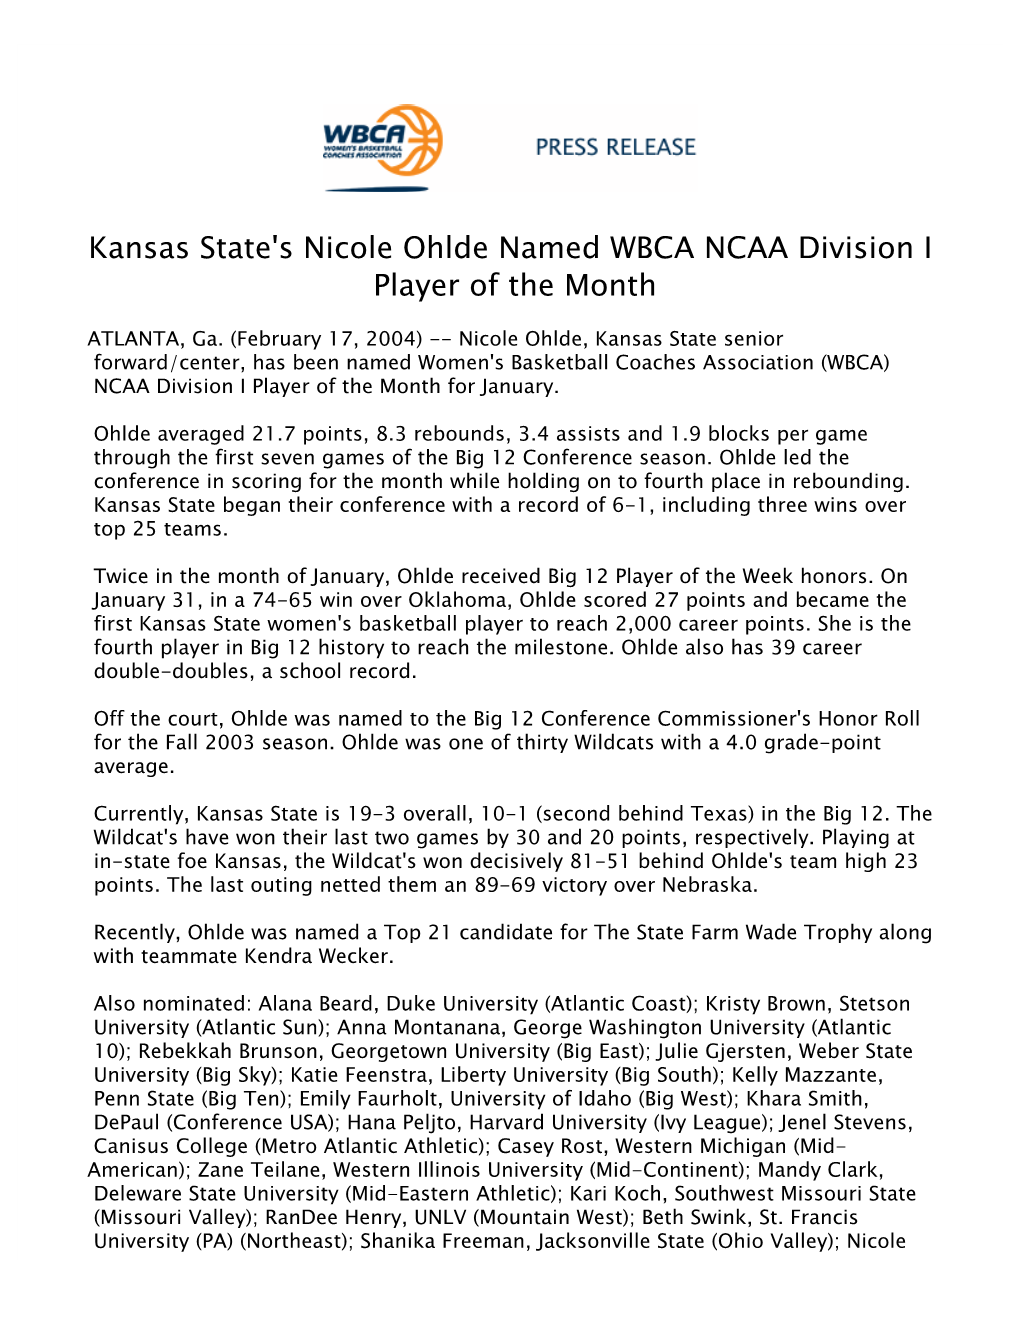 Kansas State's Nicole Ohlde Named WBCA NCAA Division I Player of the Month